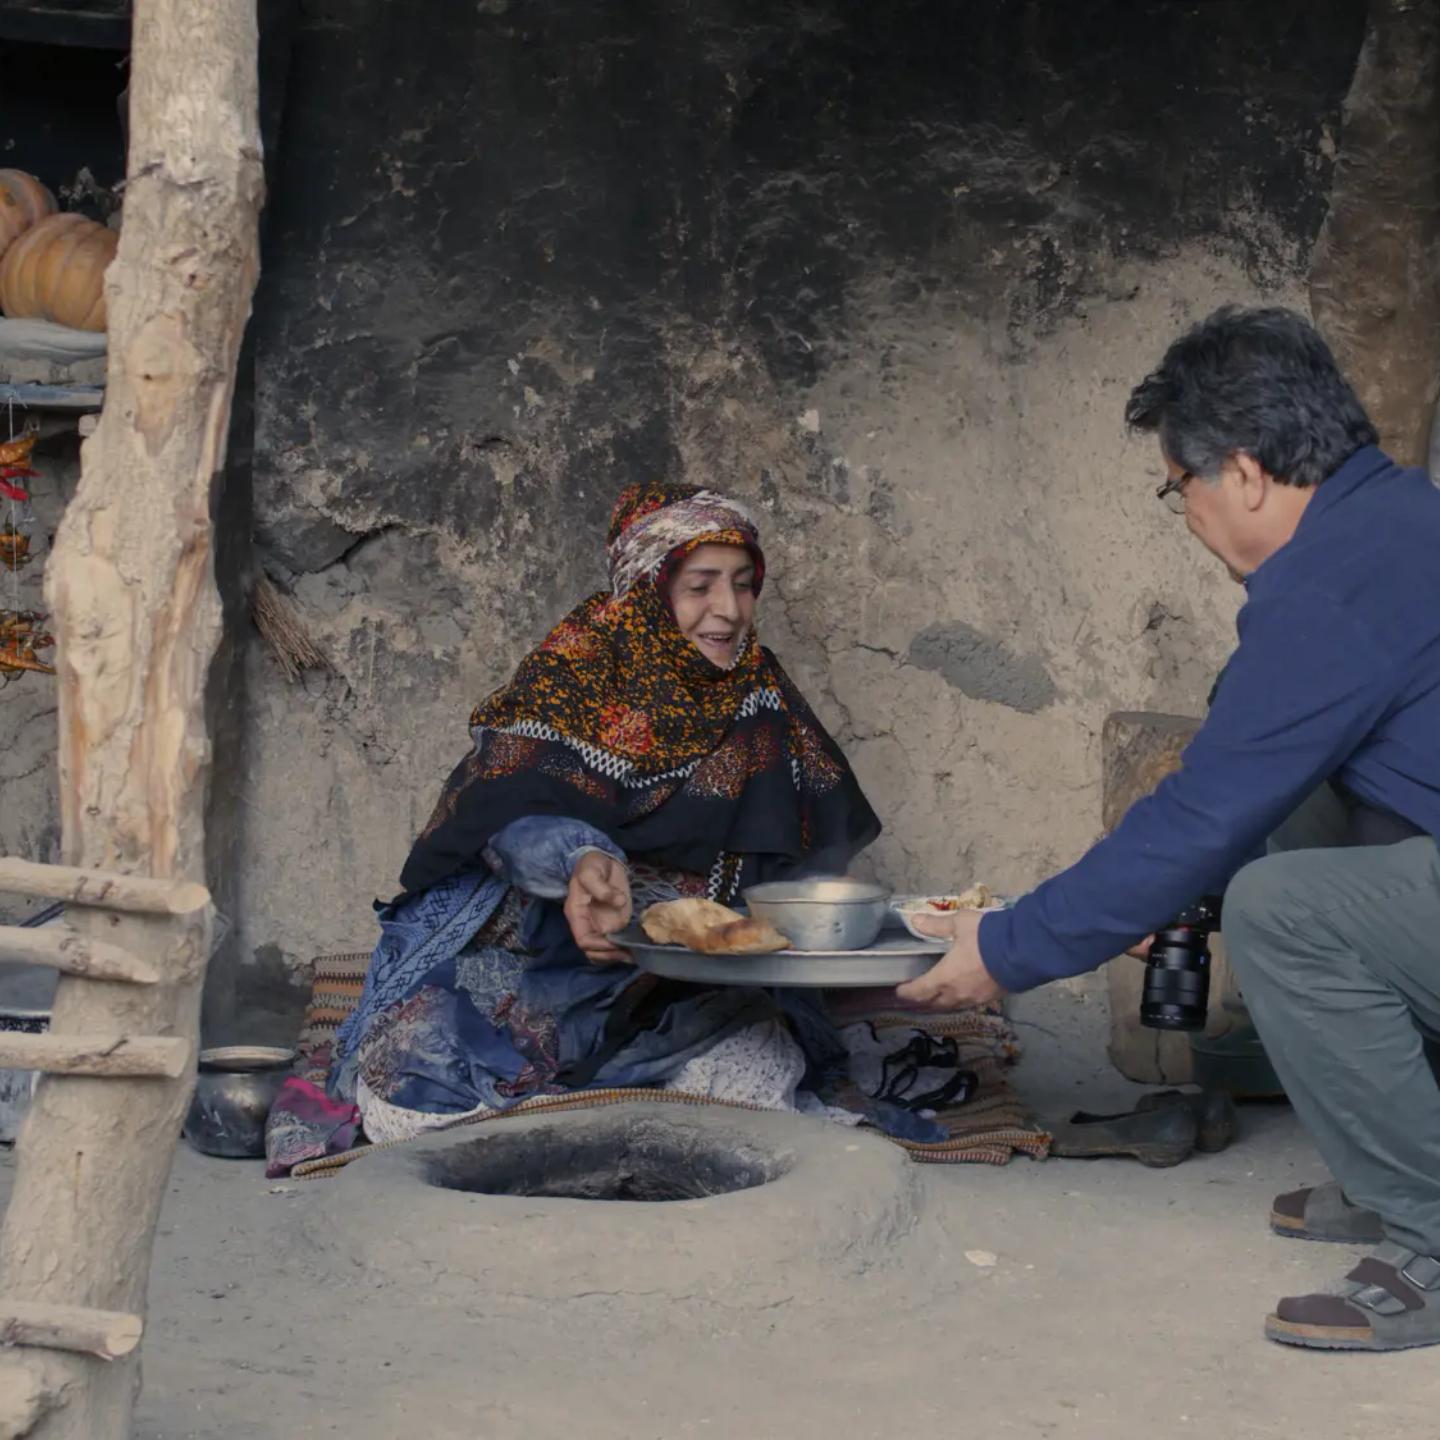 a man and woman sitting on the ground eating food